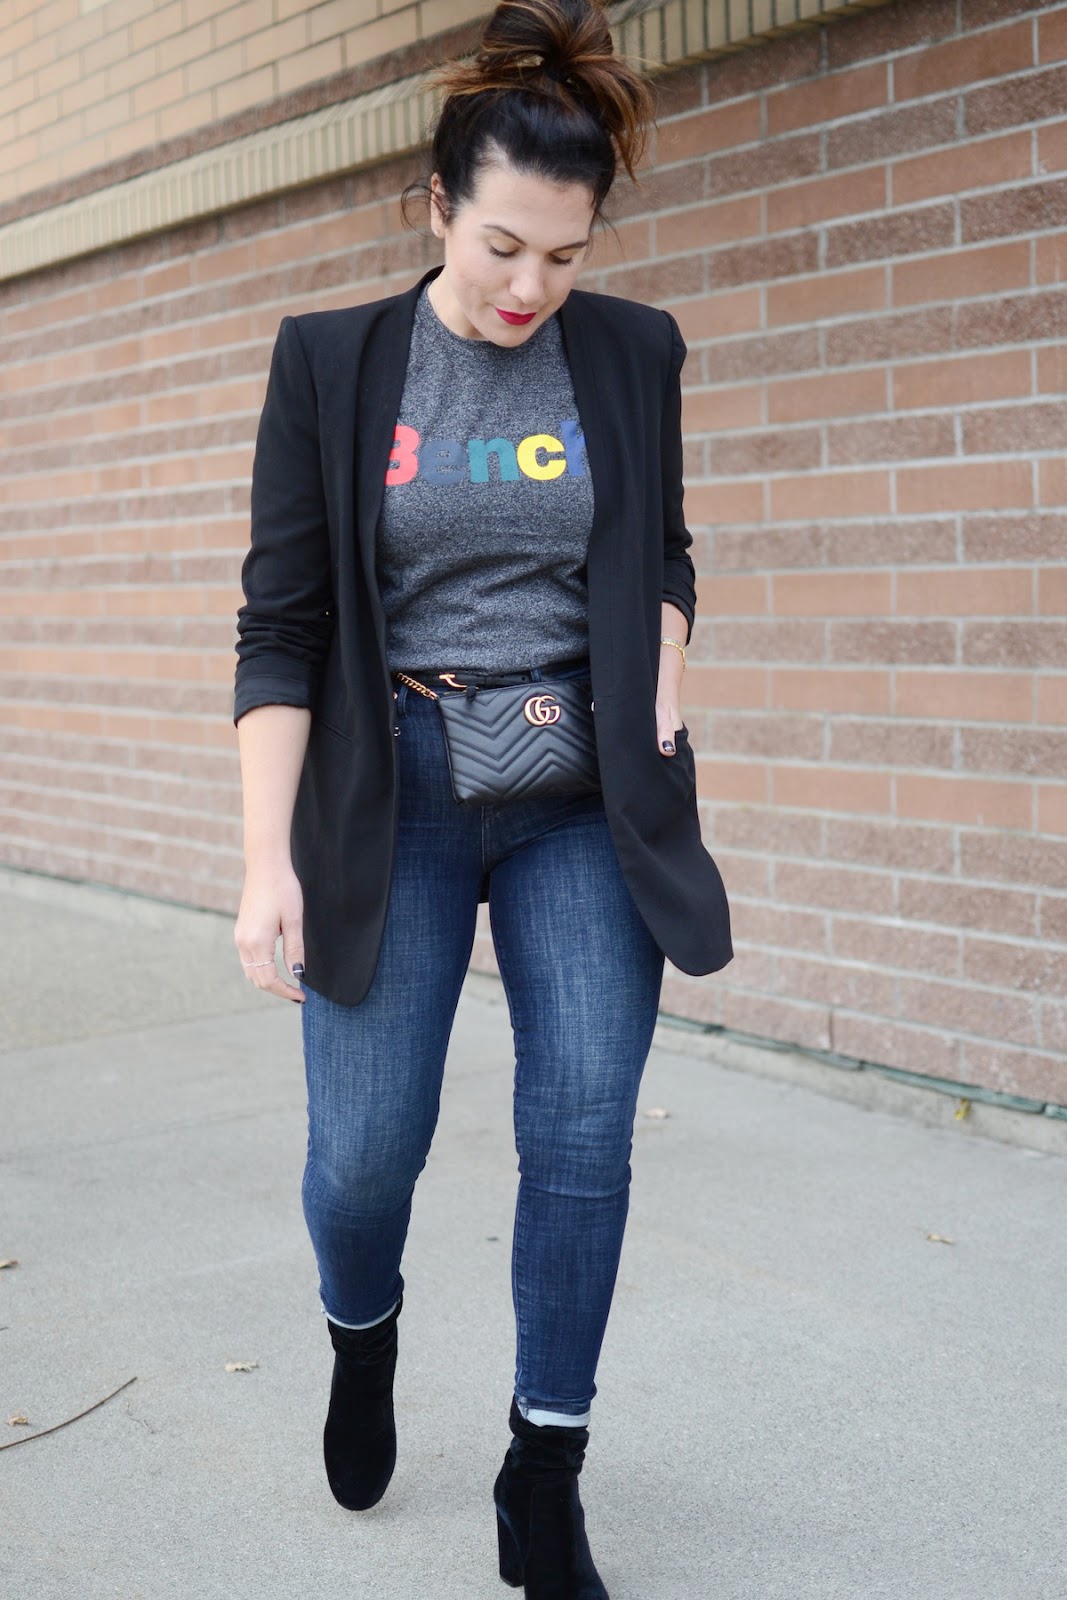 Bench logo tshirt outfit gap skinny jeans 424 fifth velvet boots blazer fall fashion vancouver blogger 2